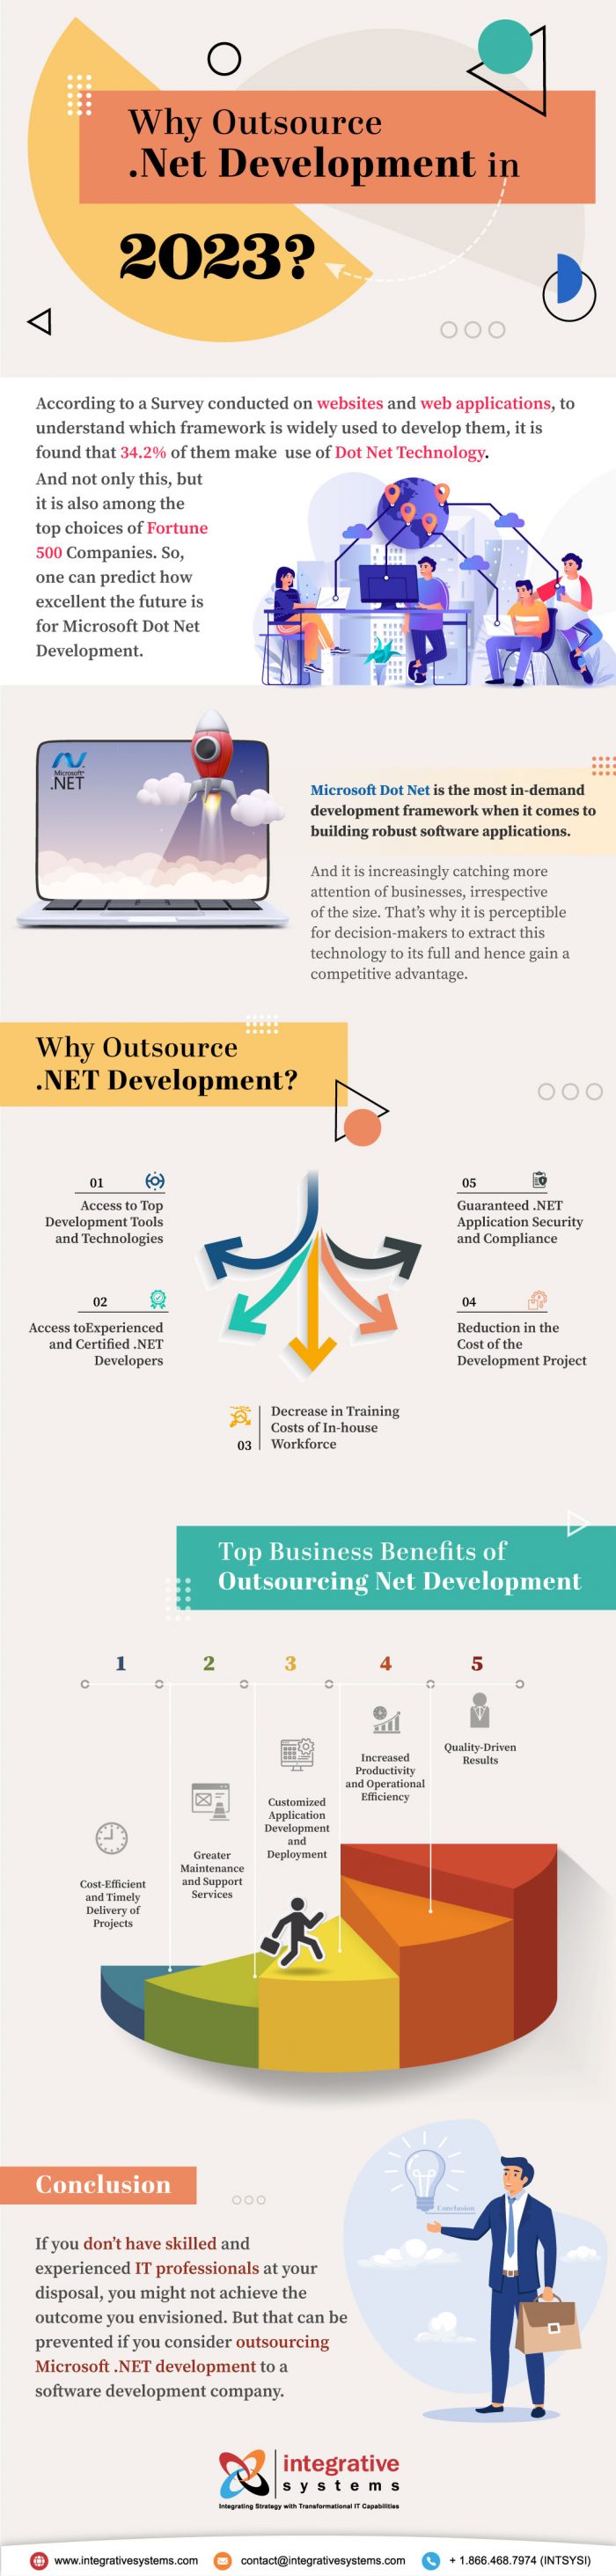 Why Outsource Dot Net Development in 2023?